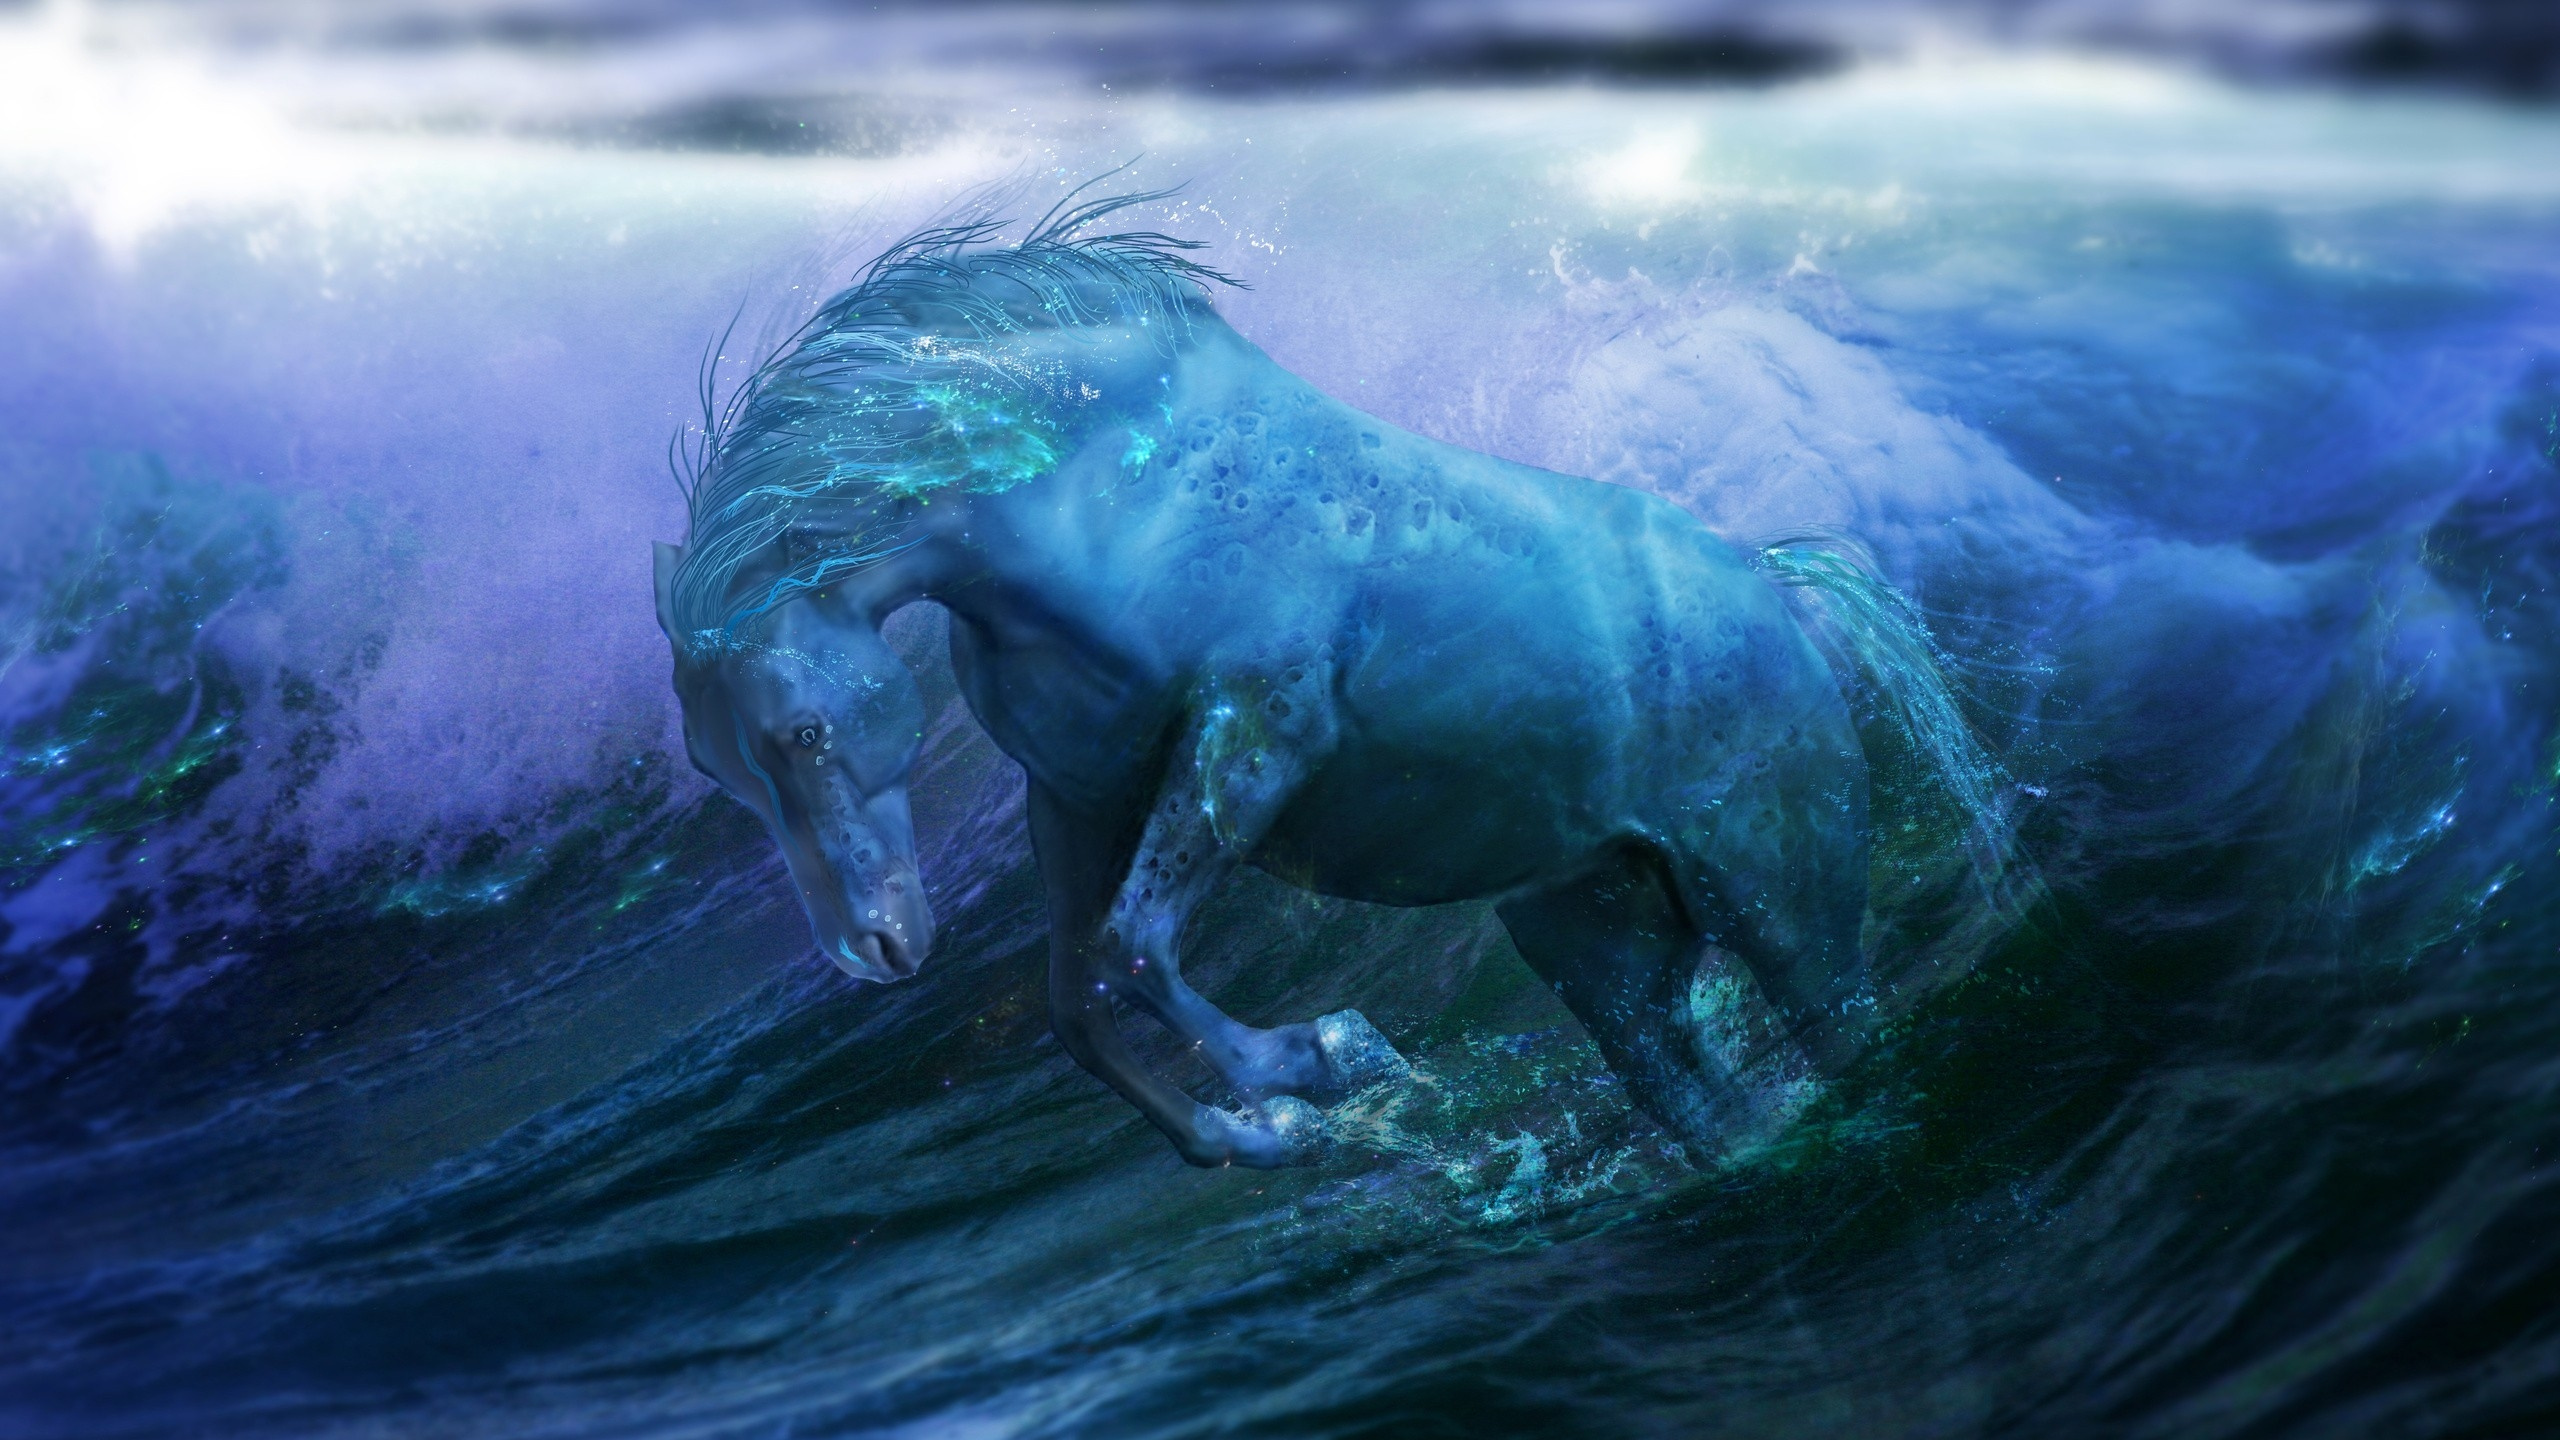 Blue and White Horse Running on Water. Wallpaper in 2560x1440 Resolution